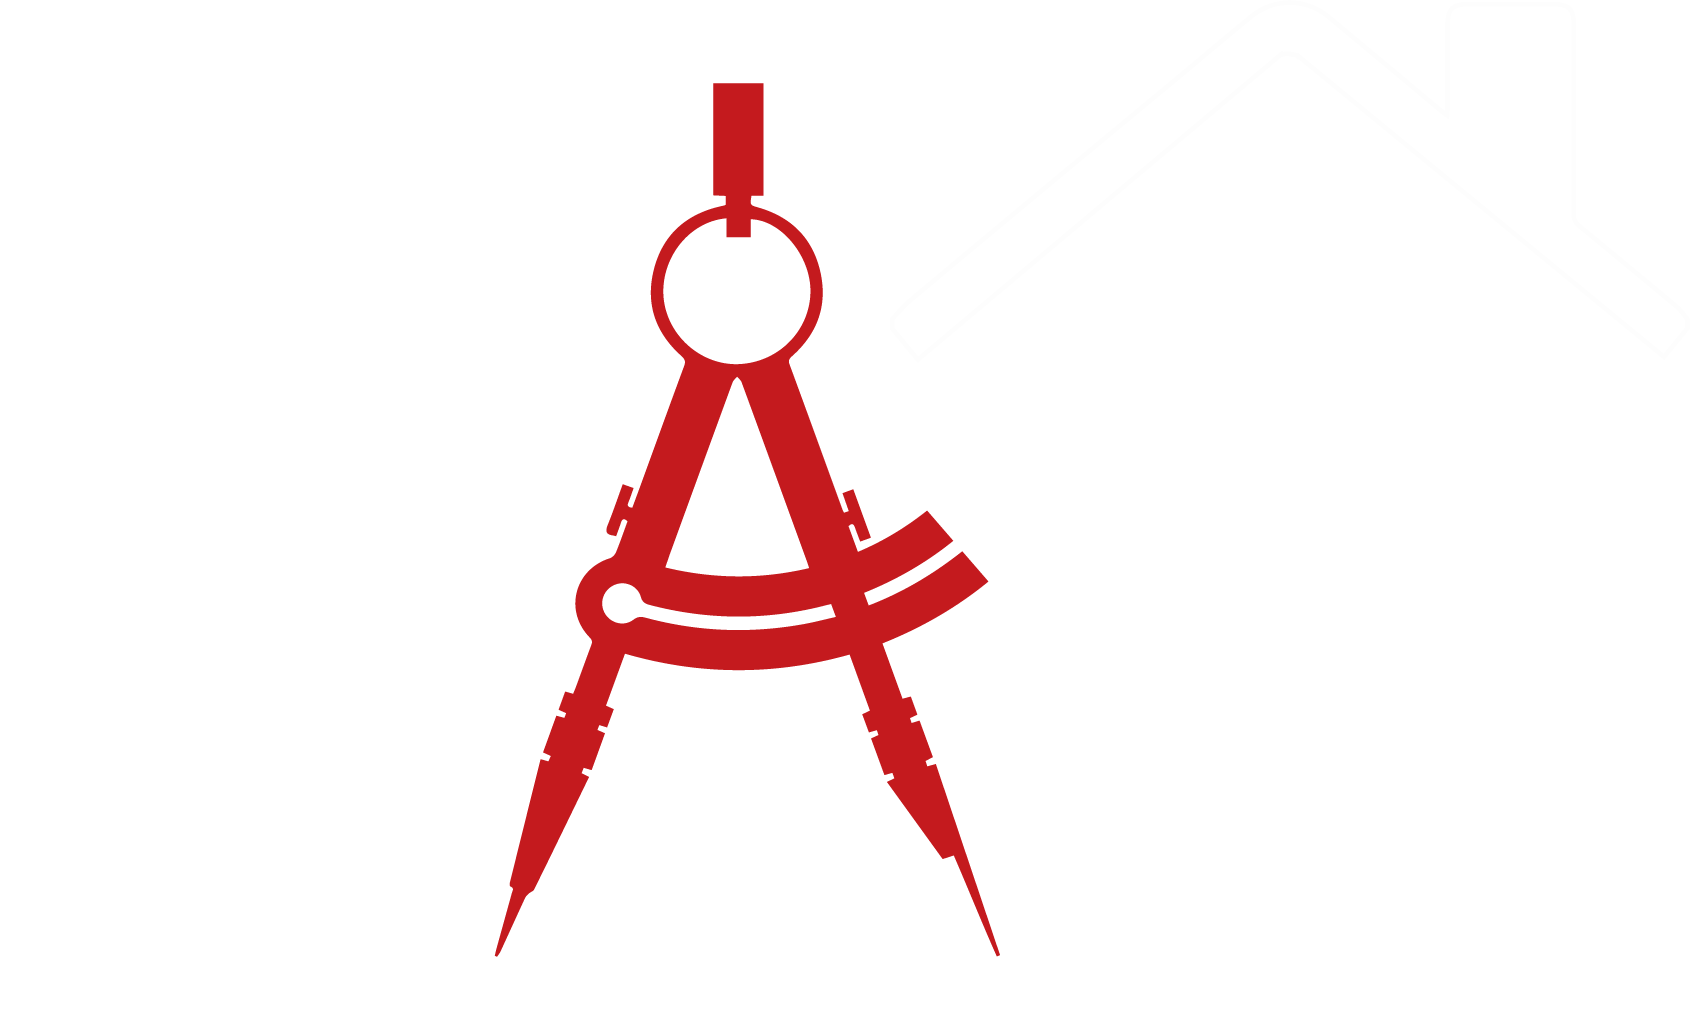 Space architects